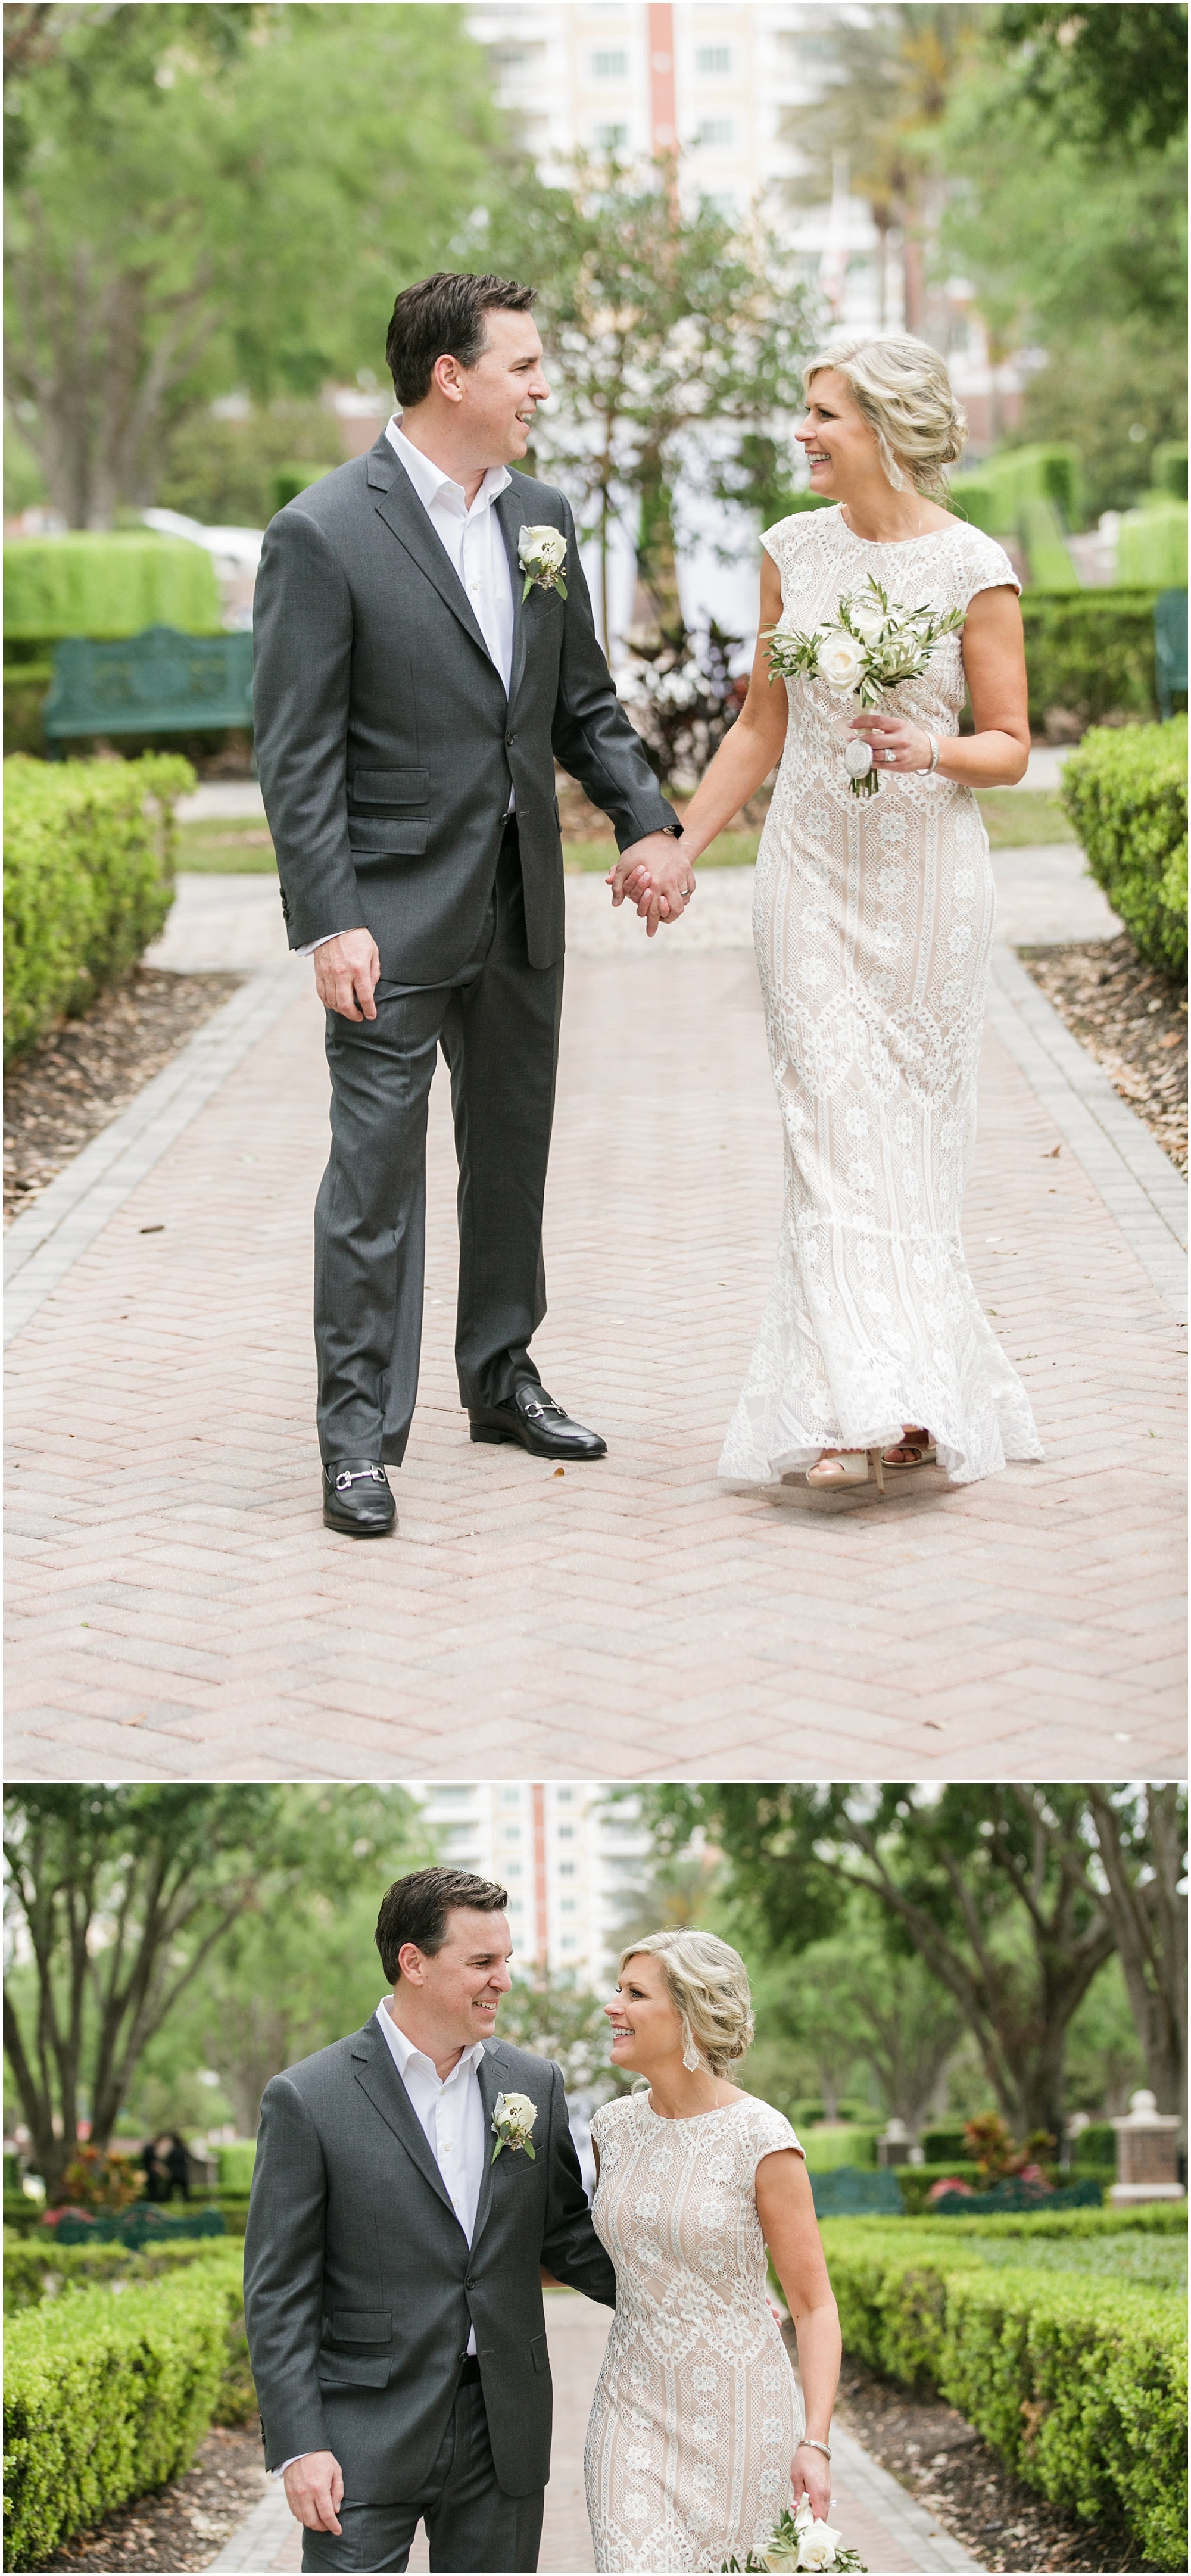 Couple walk hand and hand while smiling at each other after their wedding. 